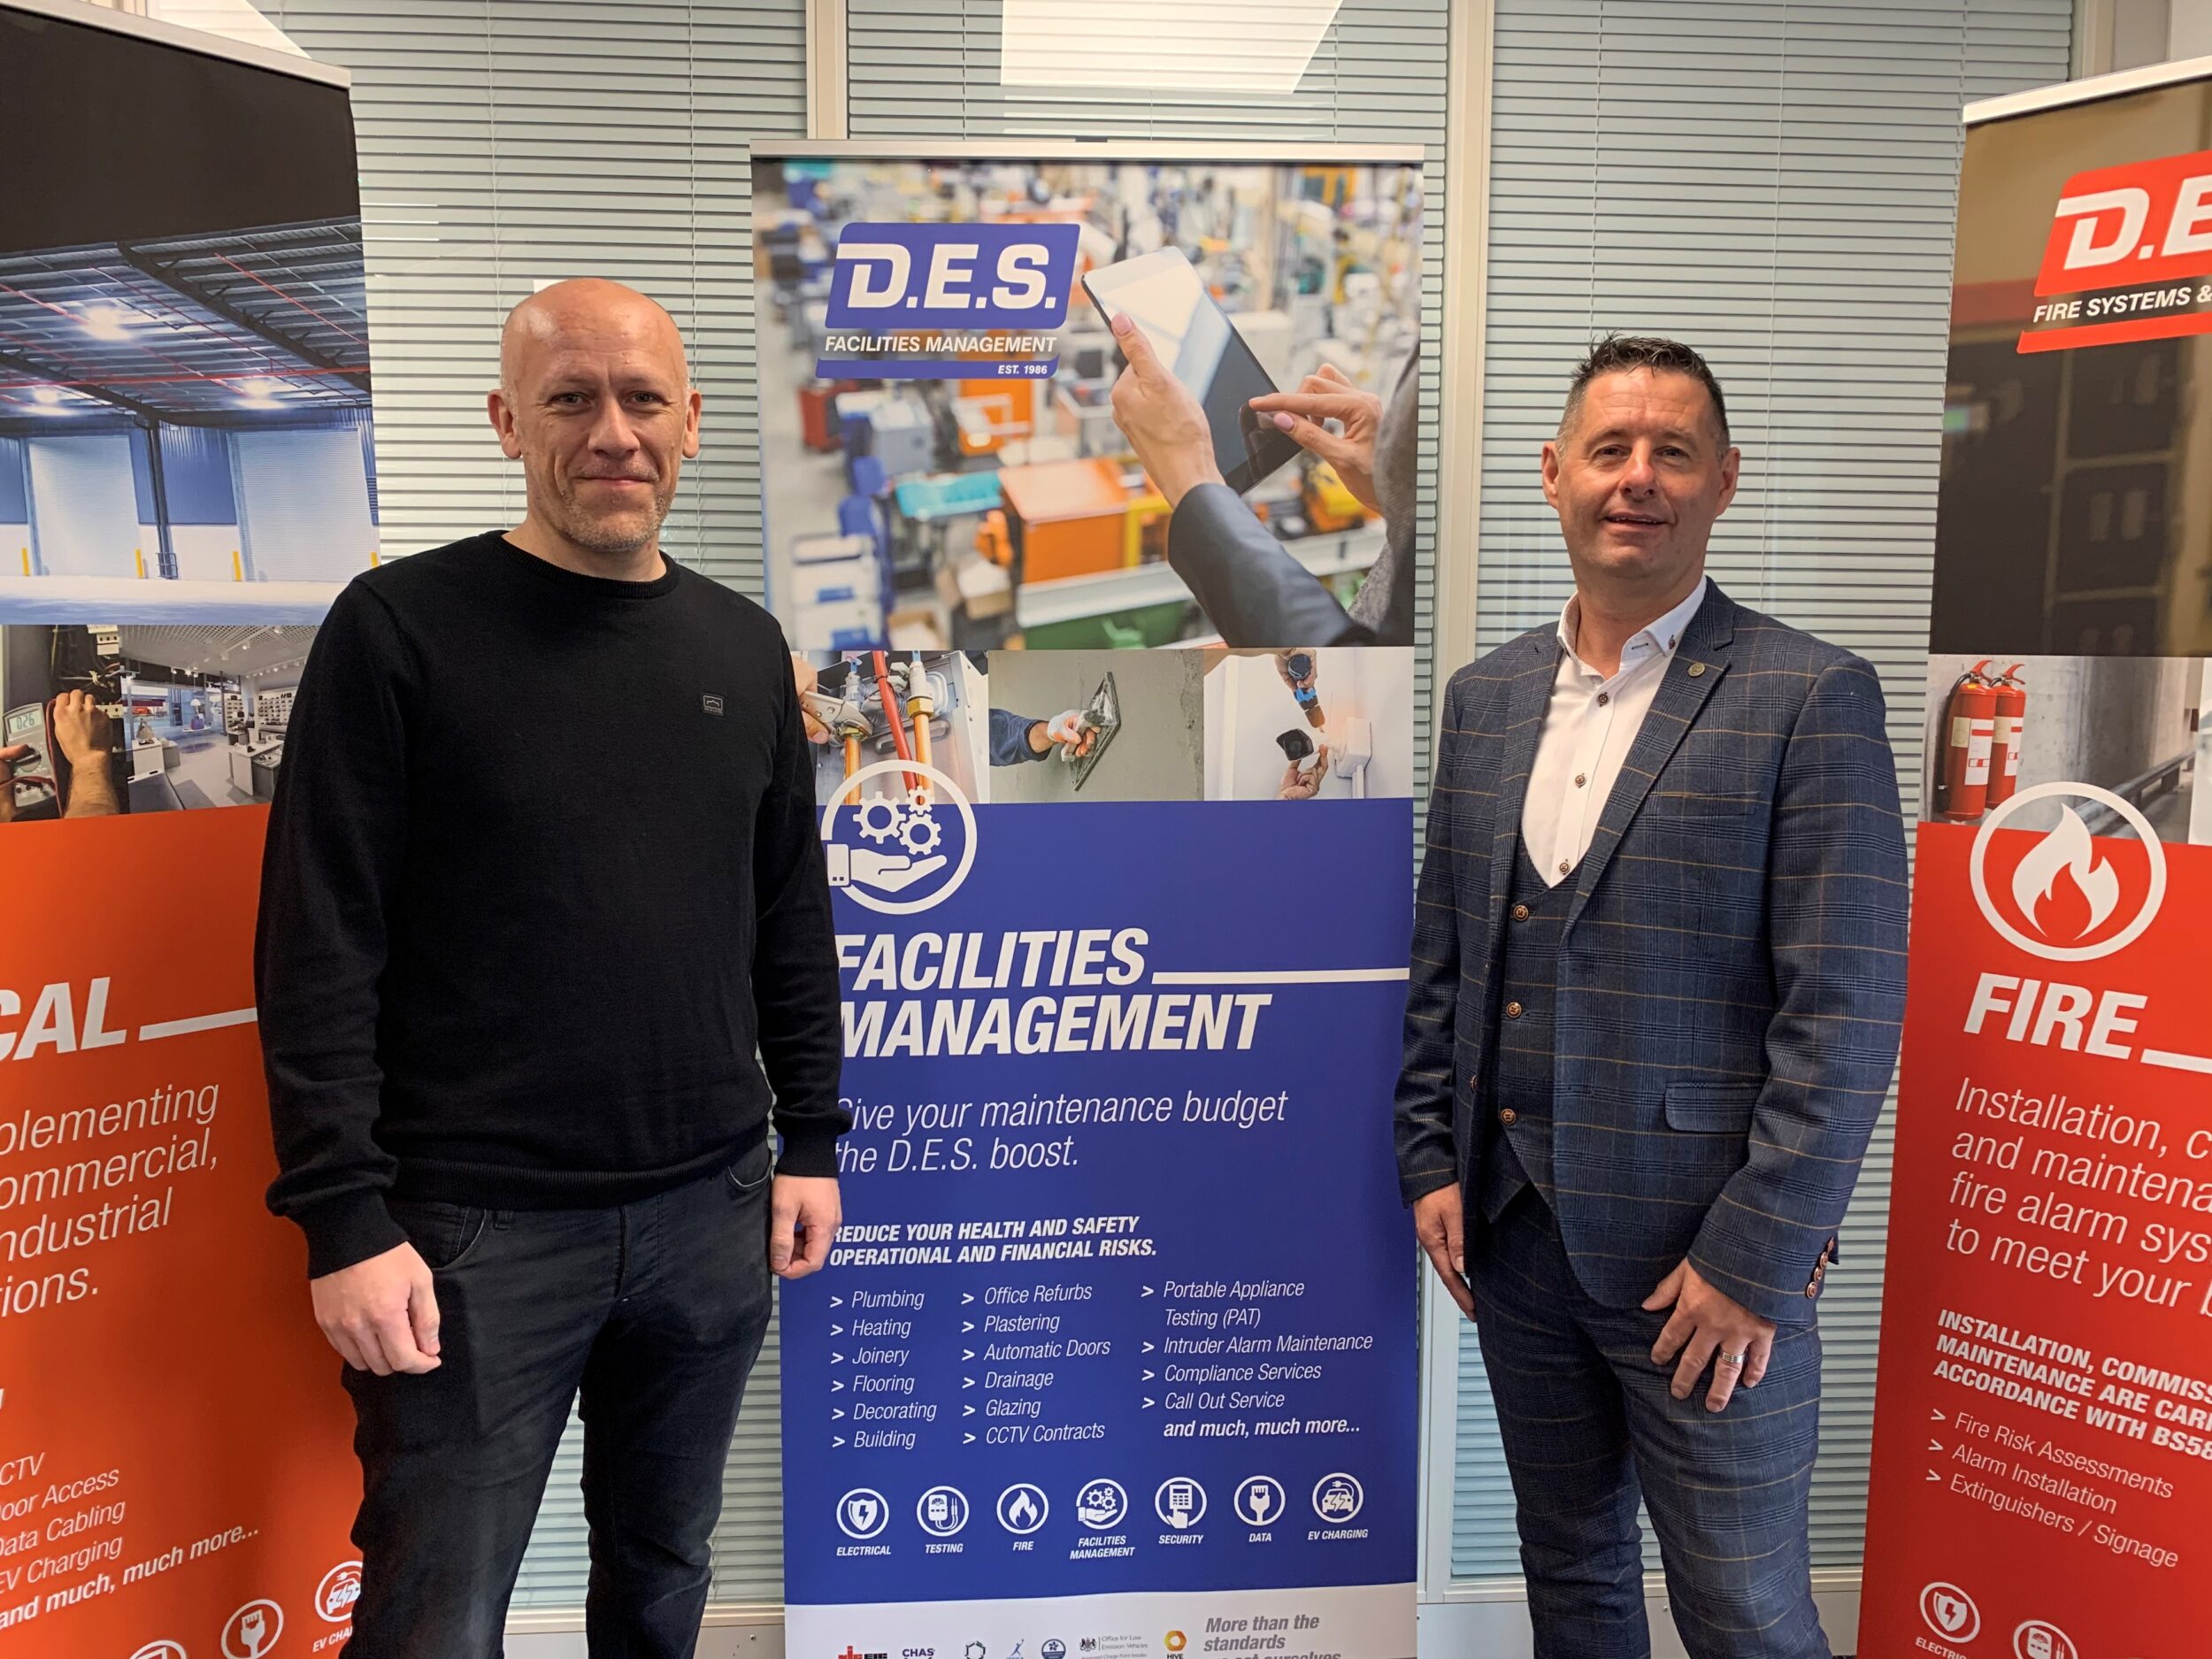 D.E.S. Group renews IT contract with J700 Group